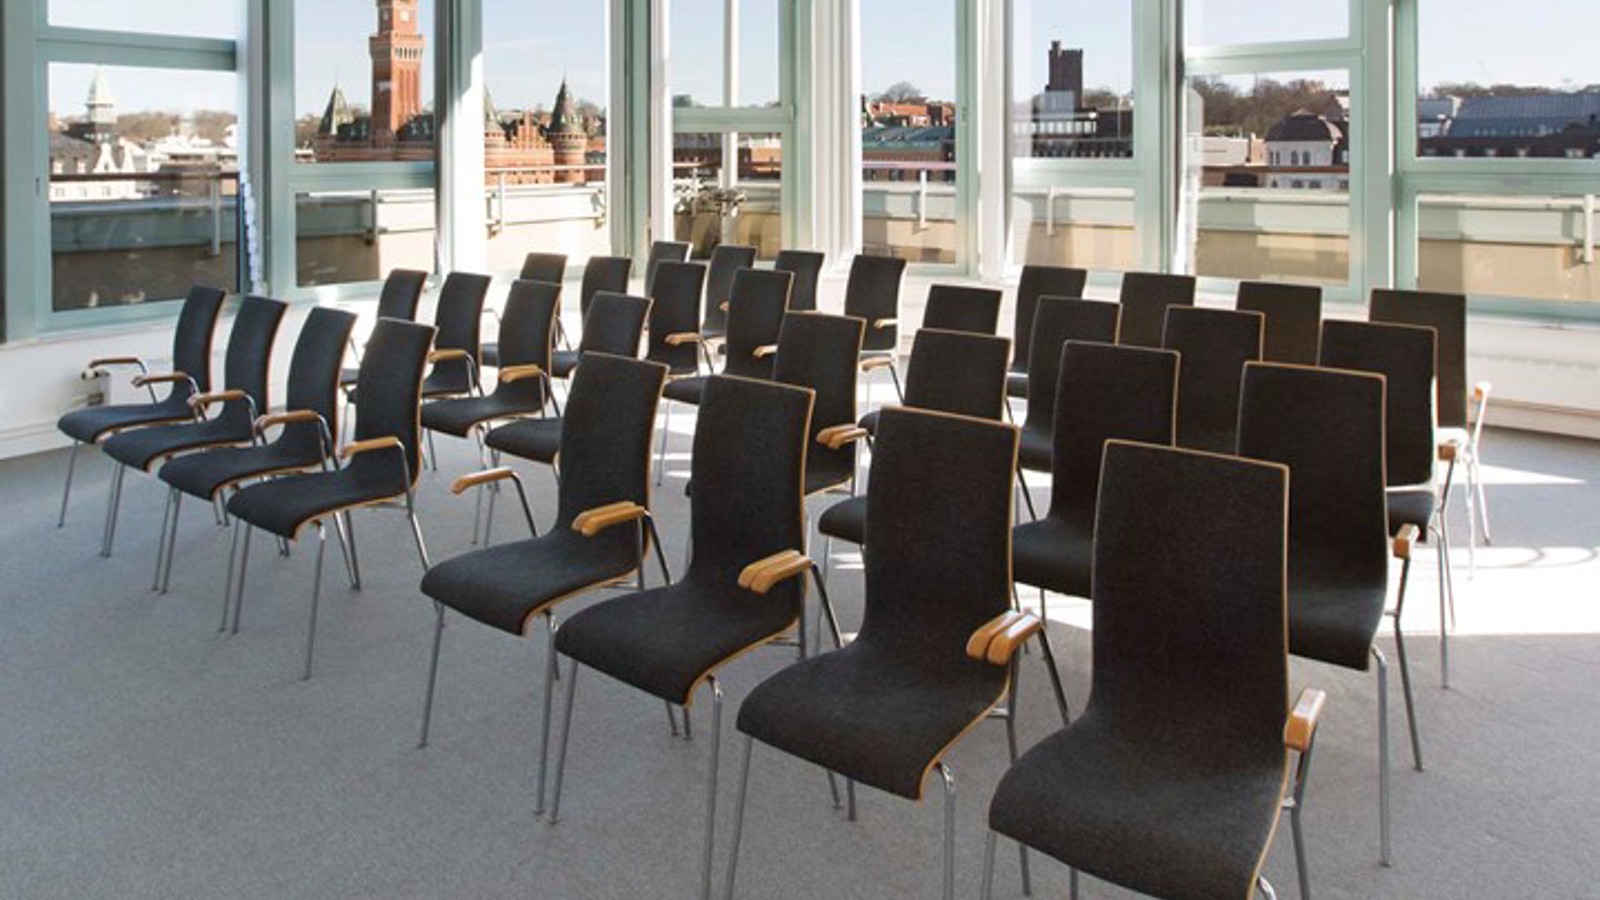 Conference room with lined up black chairs, gray carpet and large windows